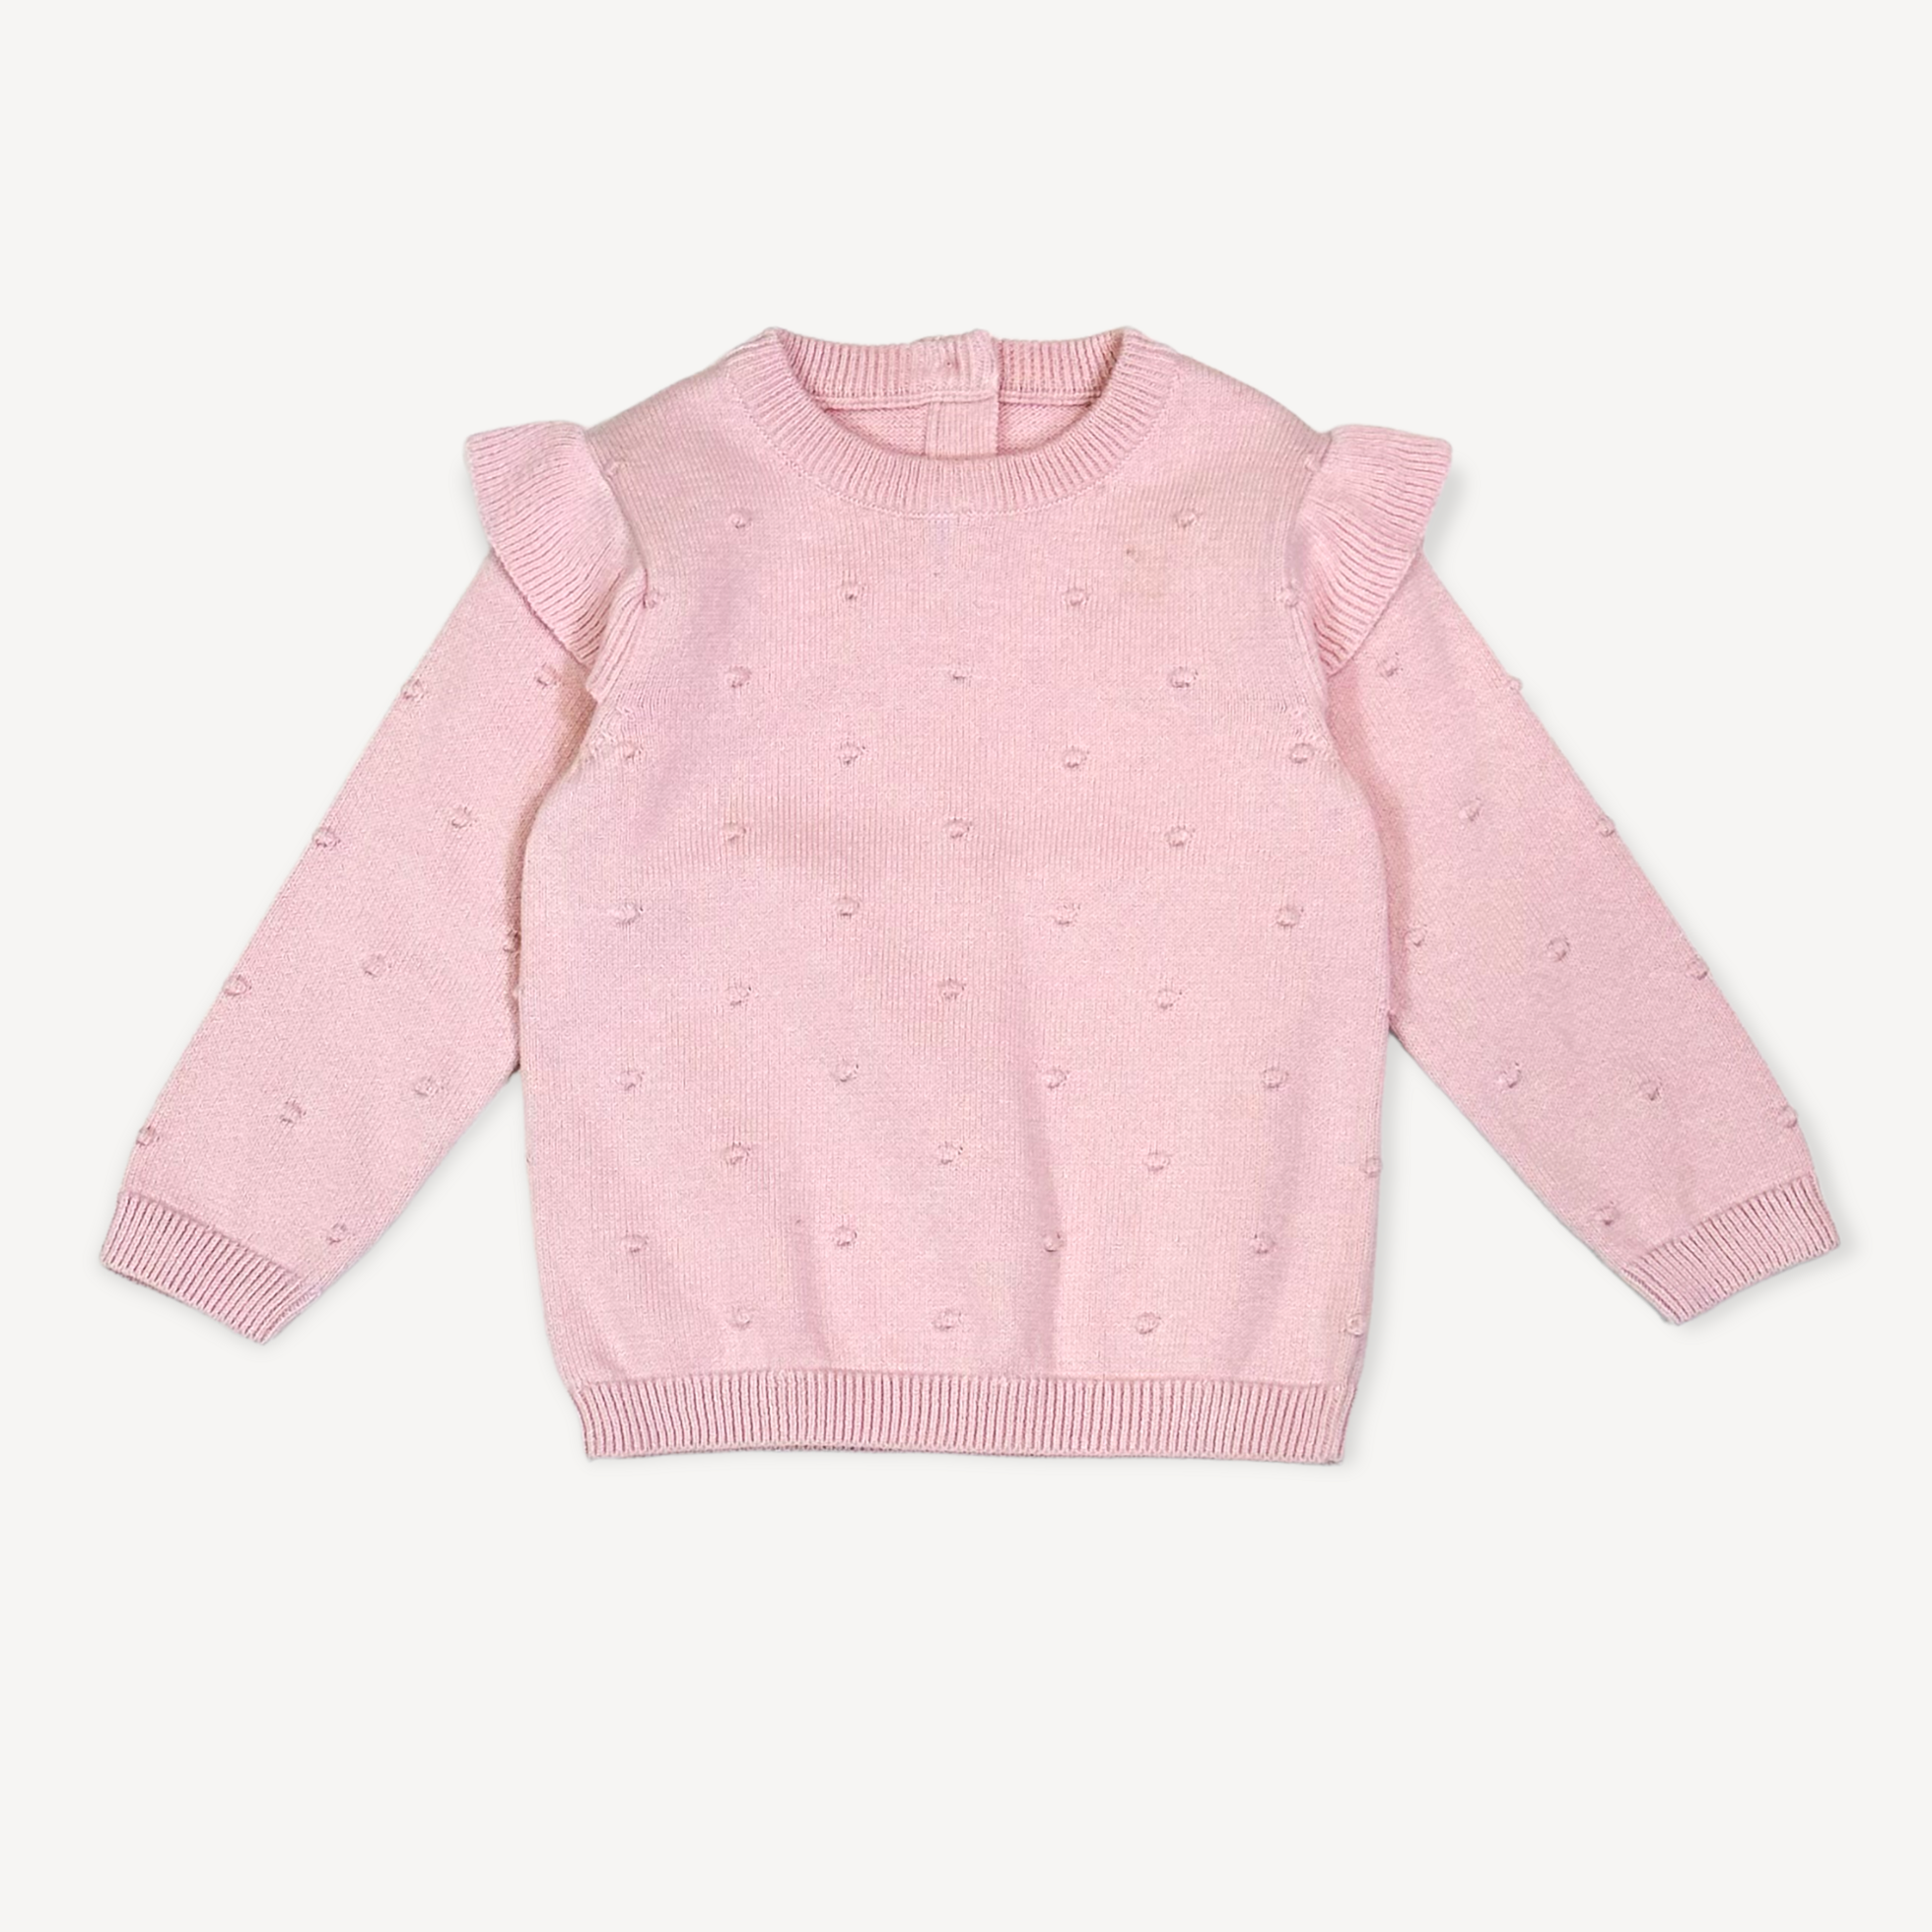 Milan Classic Ruffle Knit Baby Pullover Sweater & Pant Set - Blush Pink - Twinkle Twinkle Little One